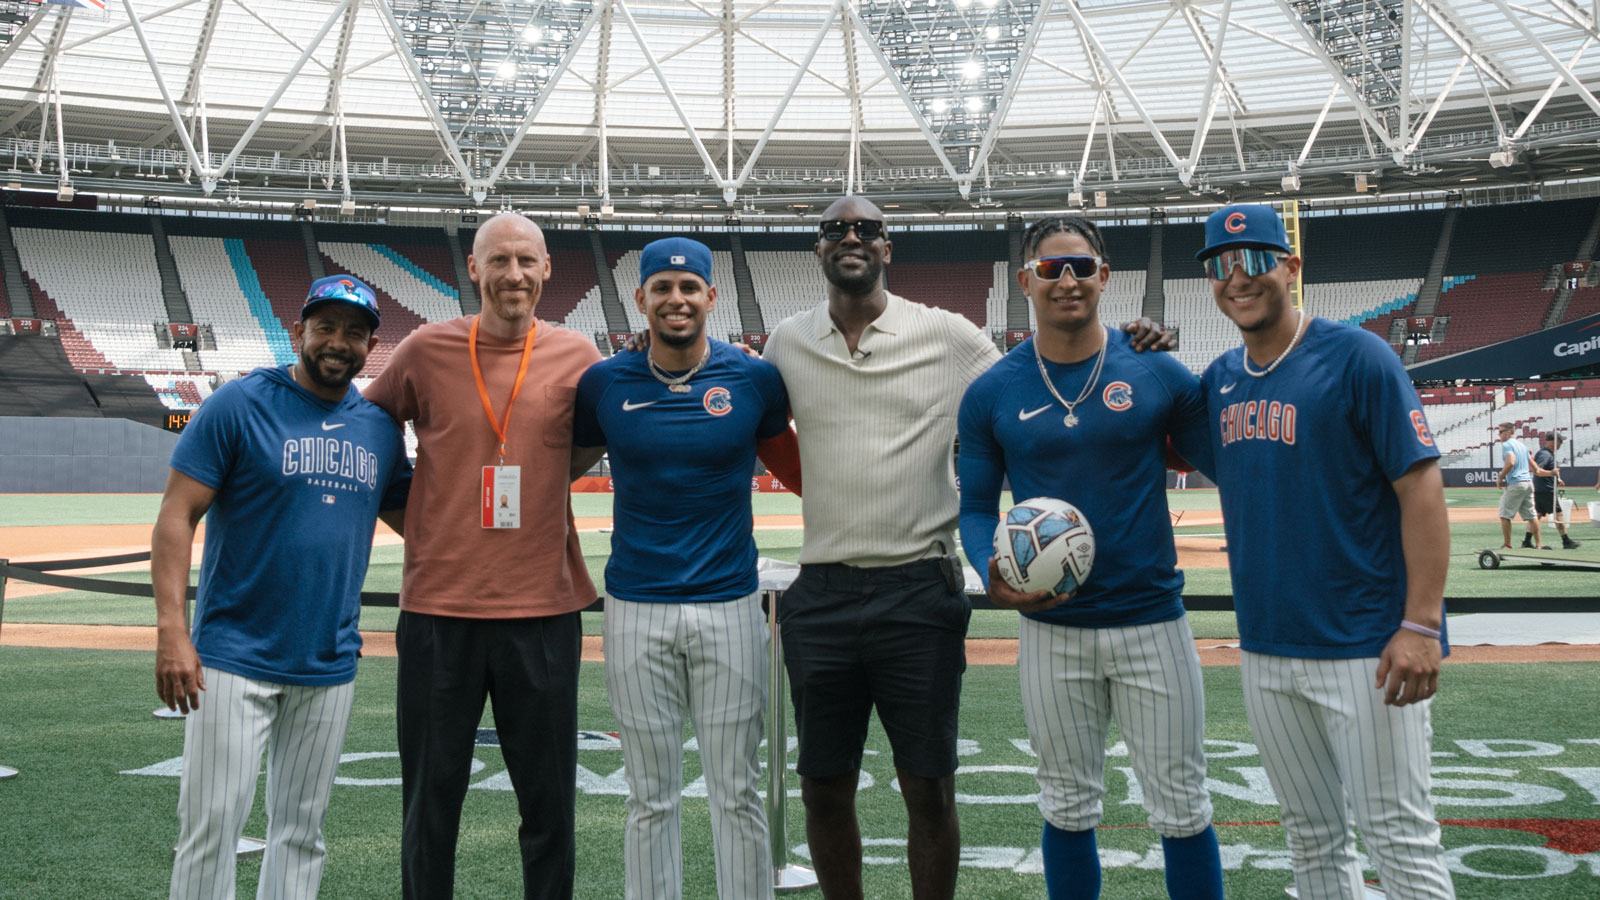 Carlton Cole and James Collins with Chicago Cubs players